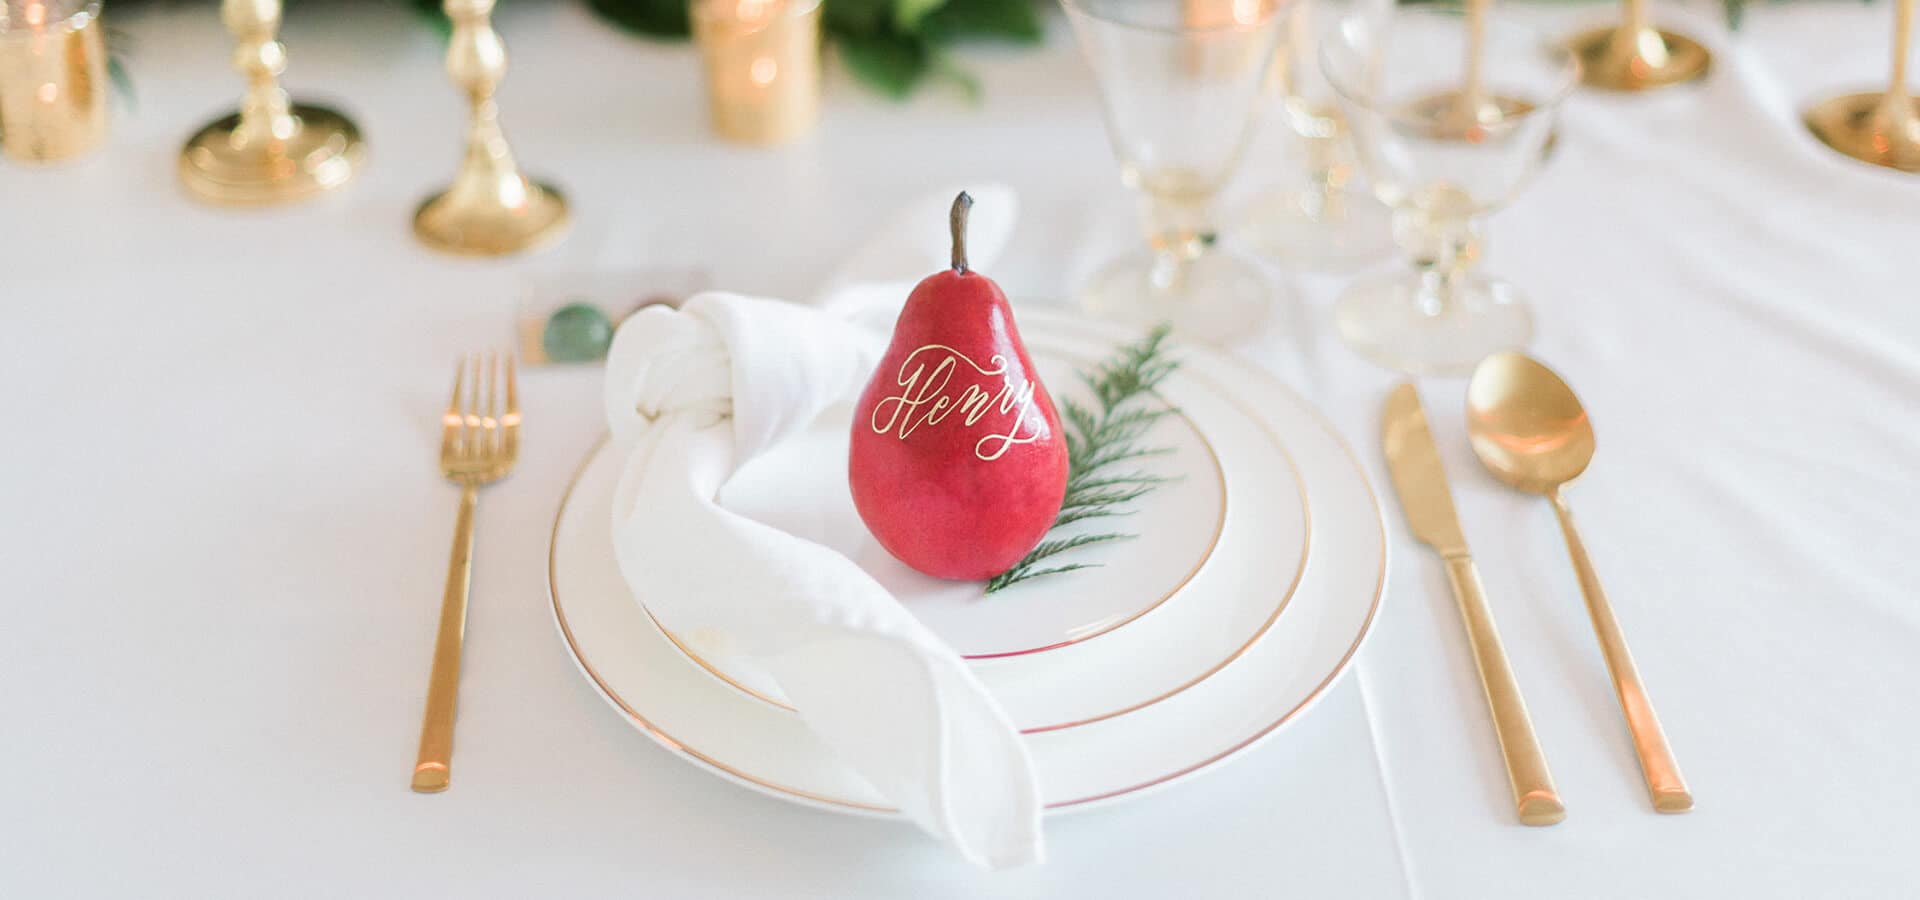 Hero image for A Marriage in a Pear Tree: A Beautiful Holiday Style Shoot